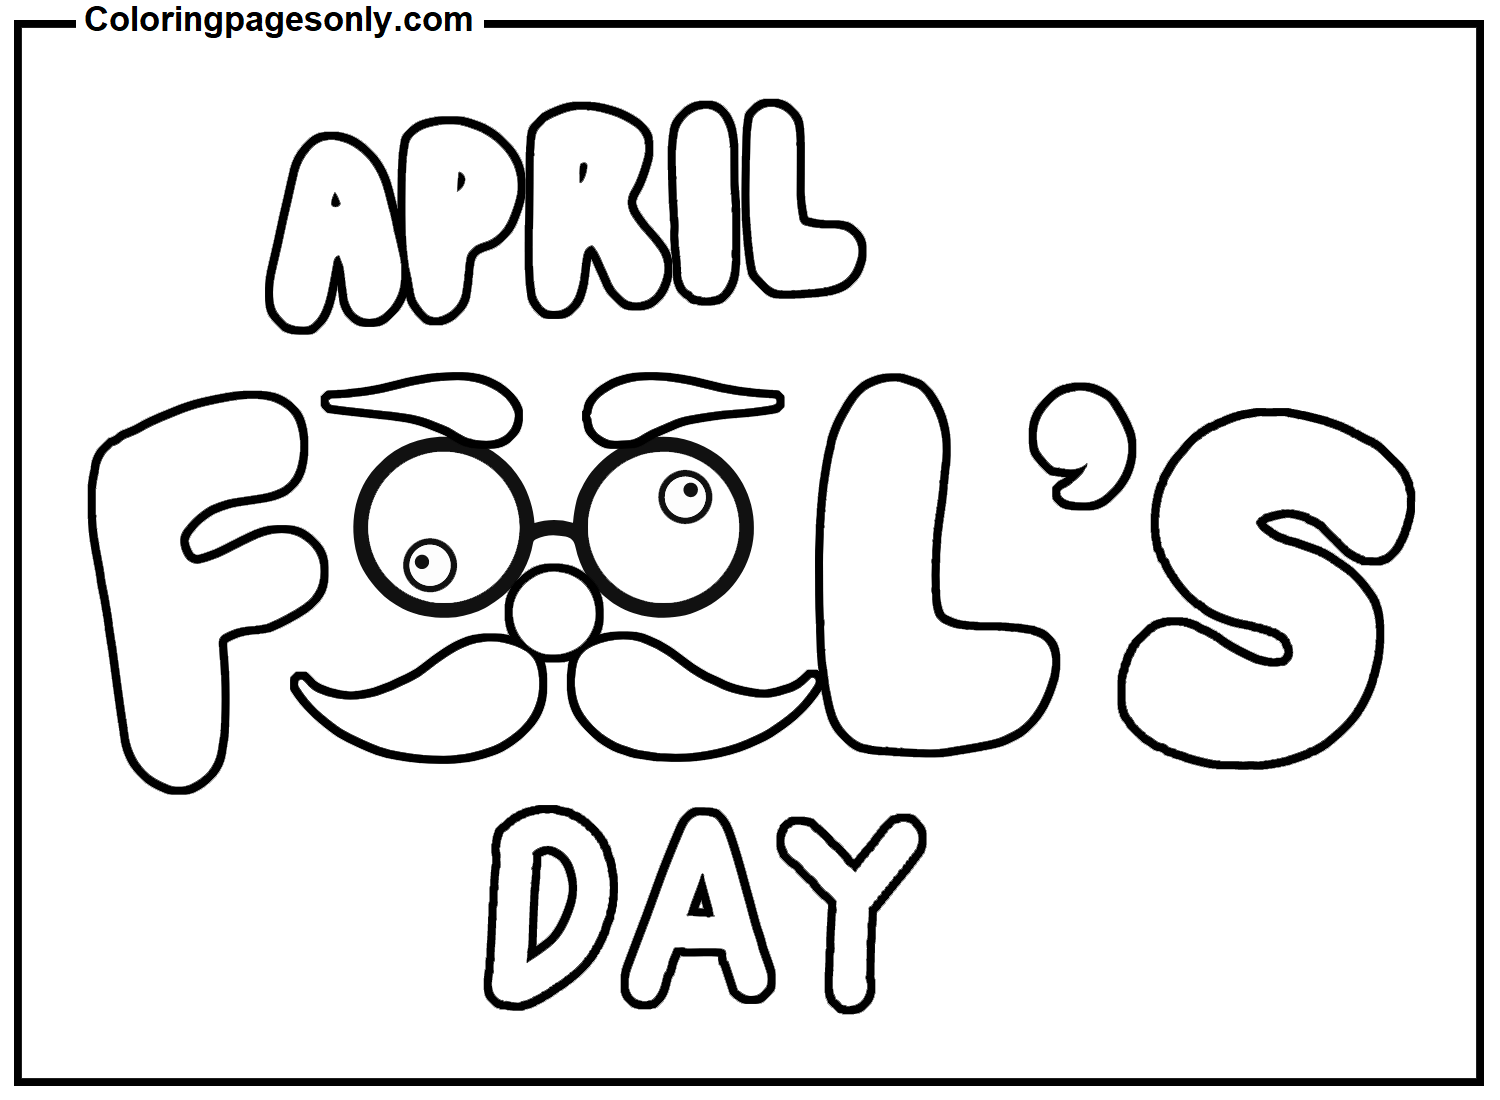 April Fools' Day Printable Sheets Coloring Pages